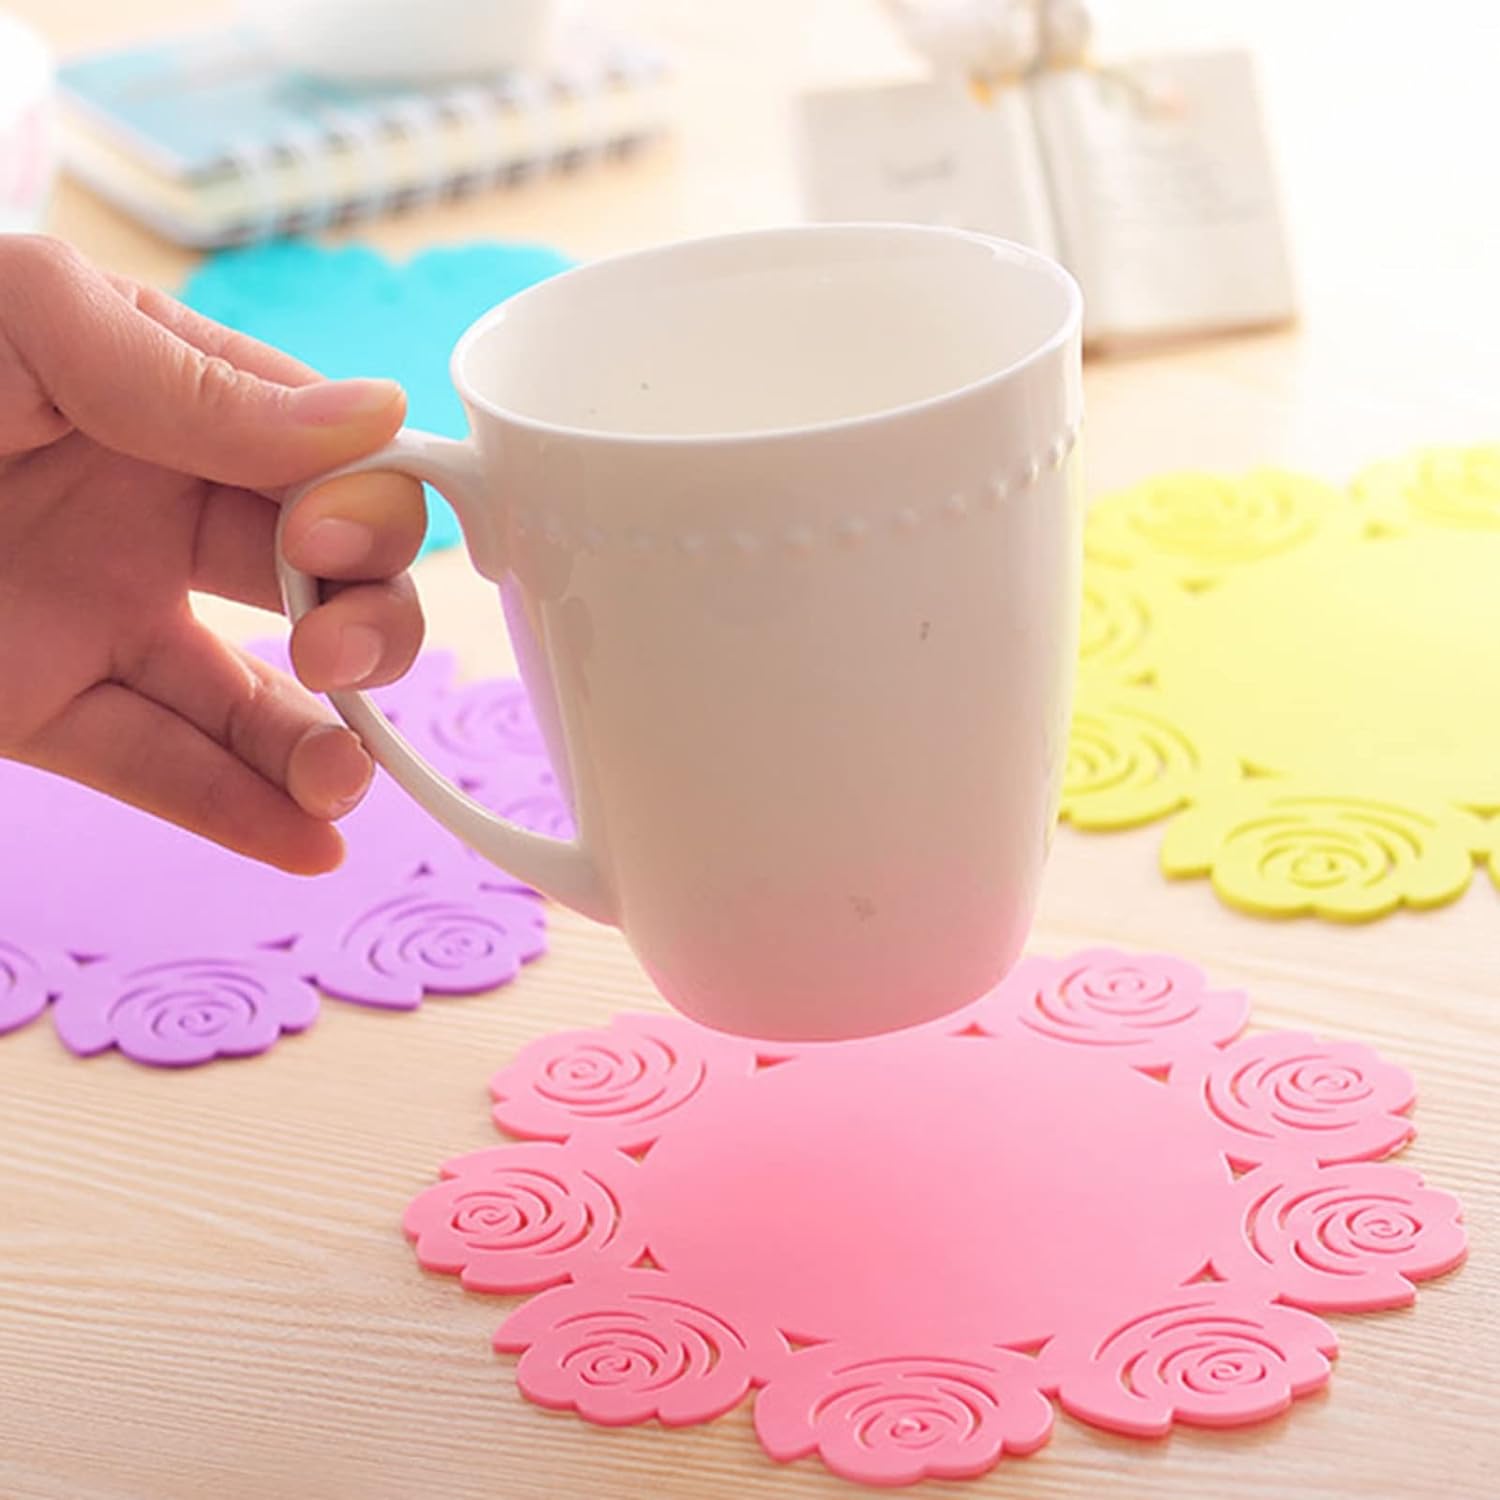 Rose Coasters: Kitchen & Dining Protection - Pack of 6